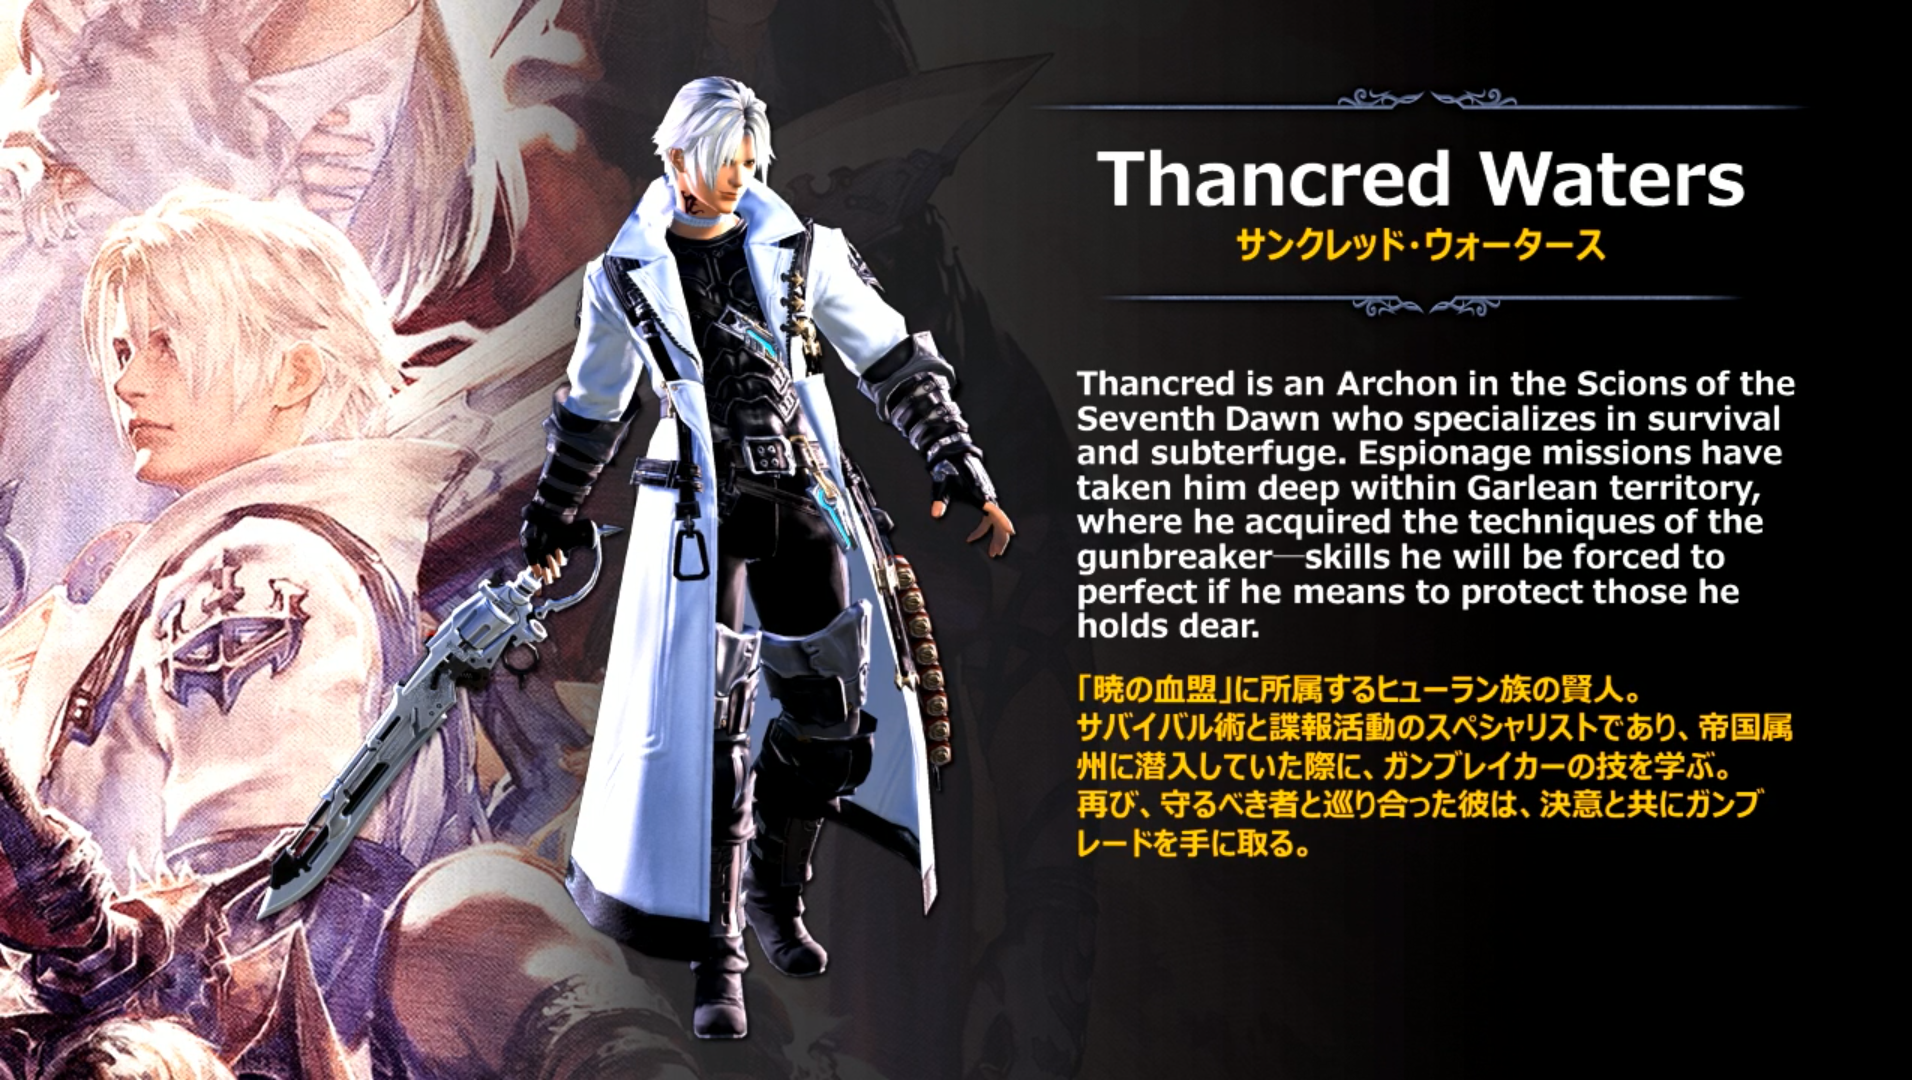 Thancred Waters - Thancred is an Archon in the Scions of the Seventh Dawn w...